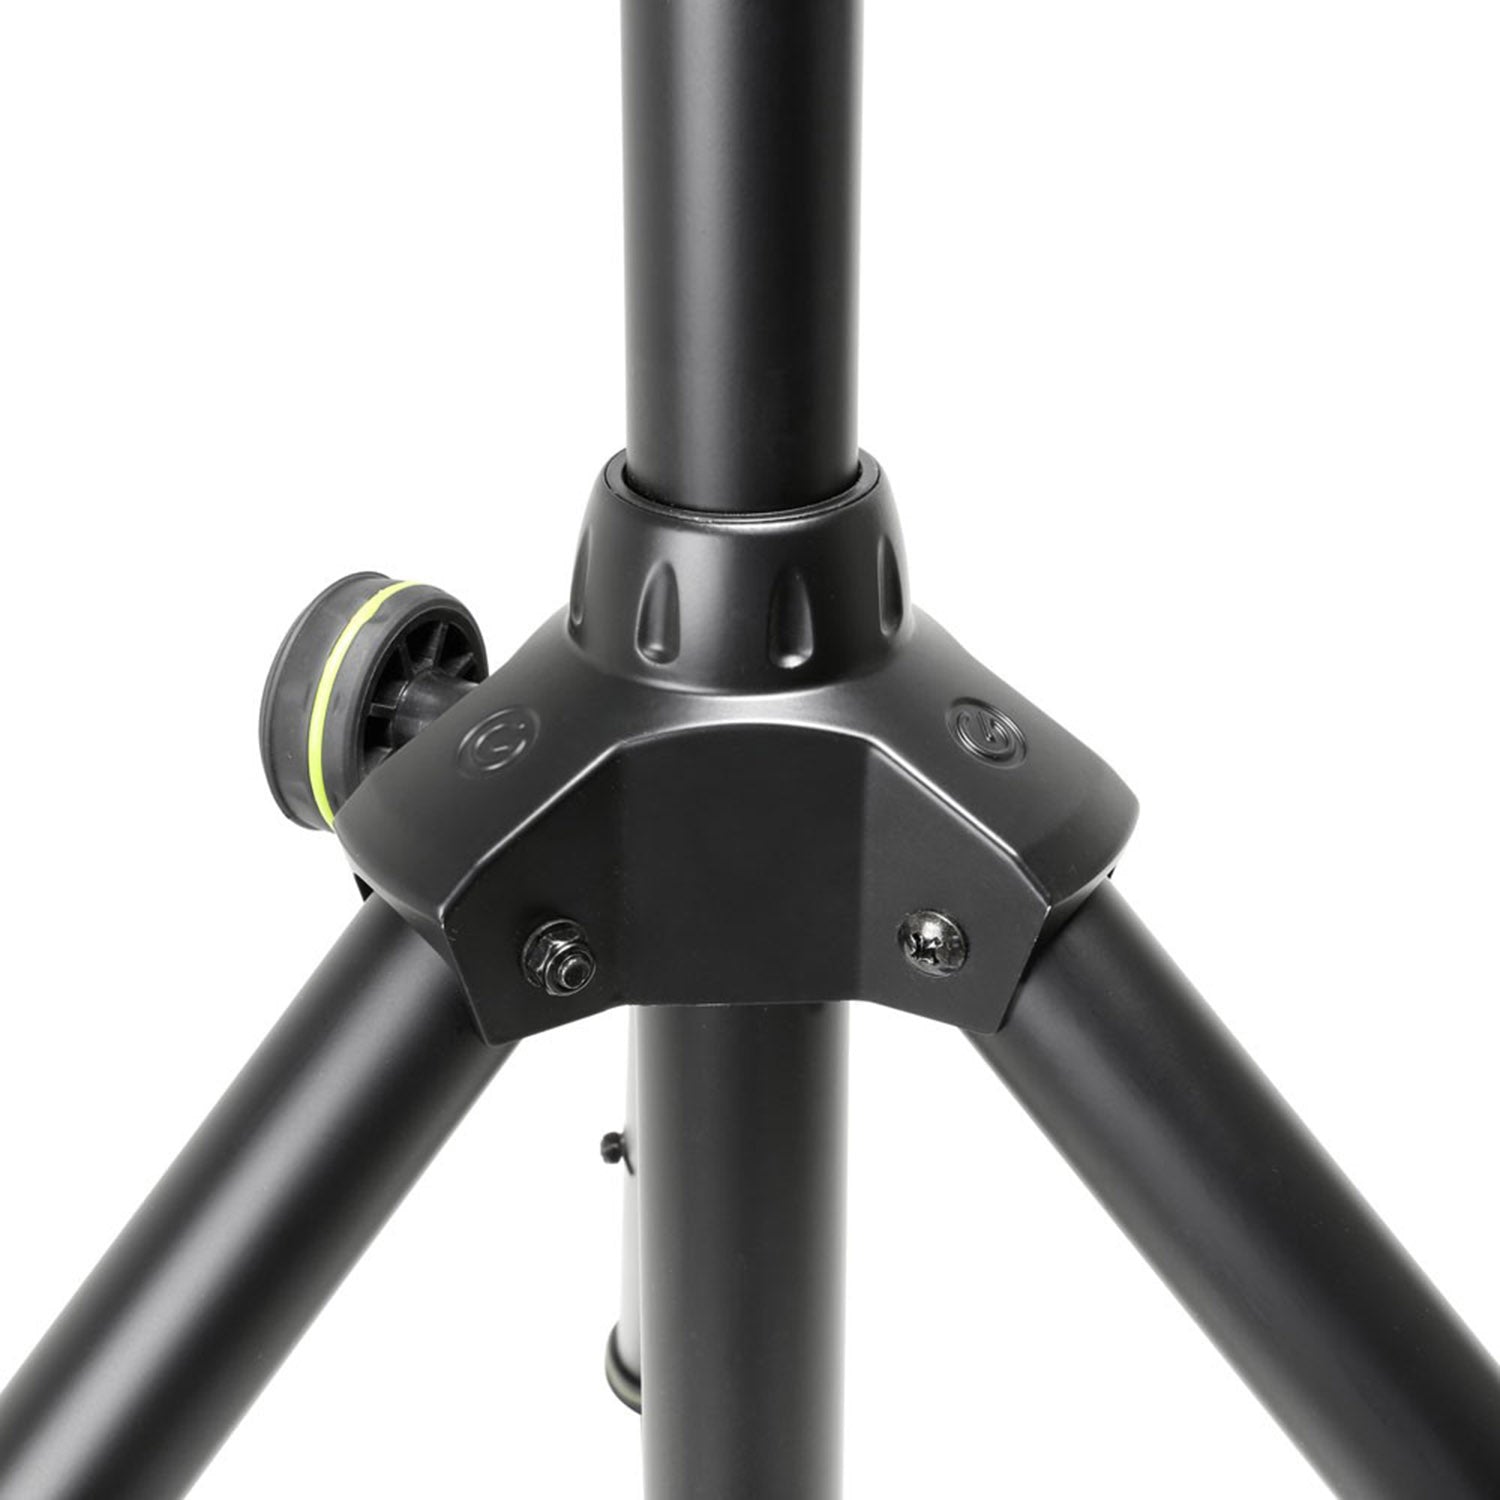 B-Stock: Gravity GSP4722B, Wind Up Speaker Crank Tripod Stand, Up To 7.2 ft by Gravity